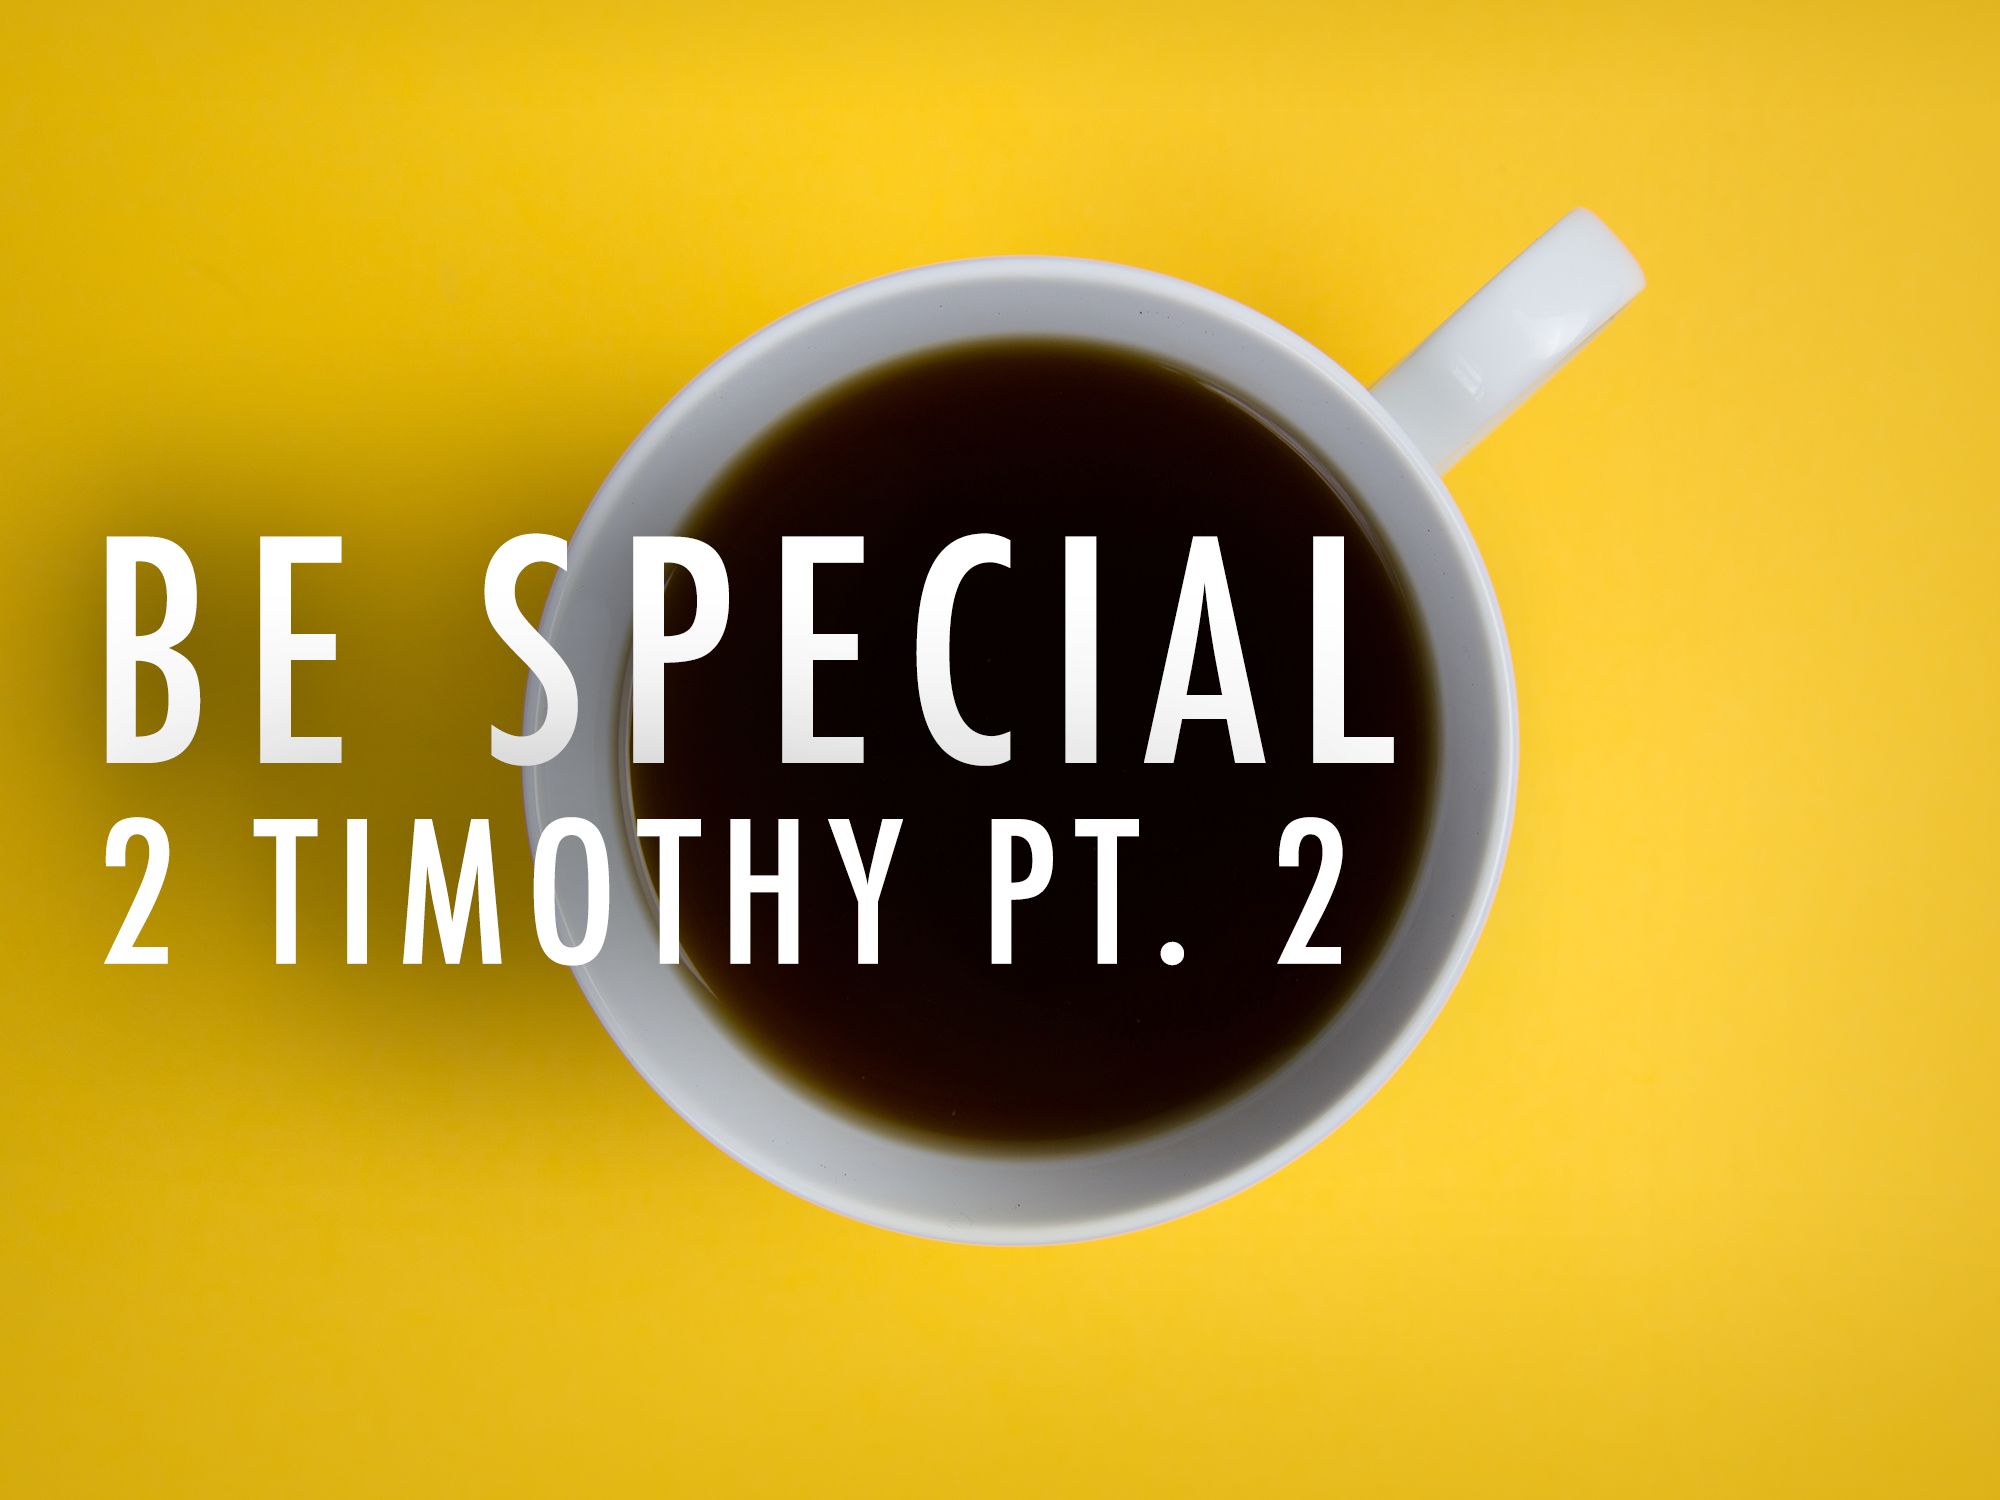 Be Special 2 Timothy